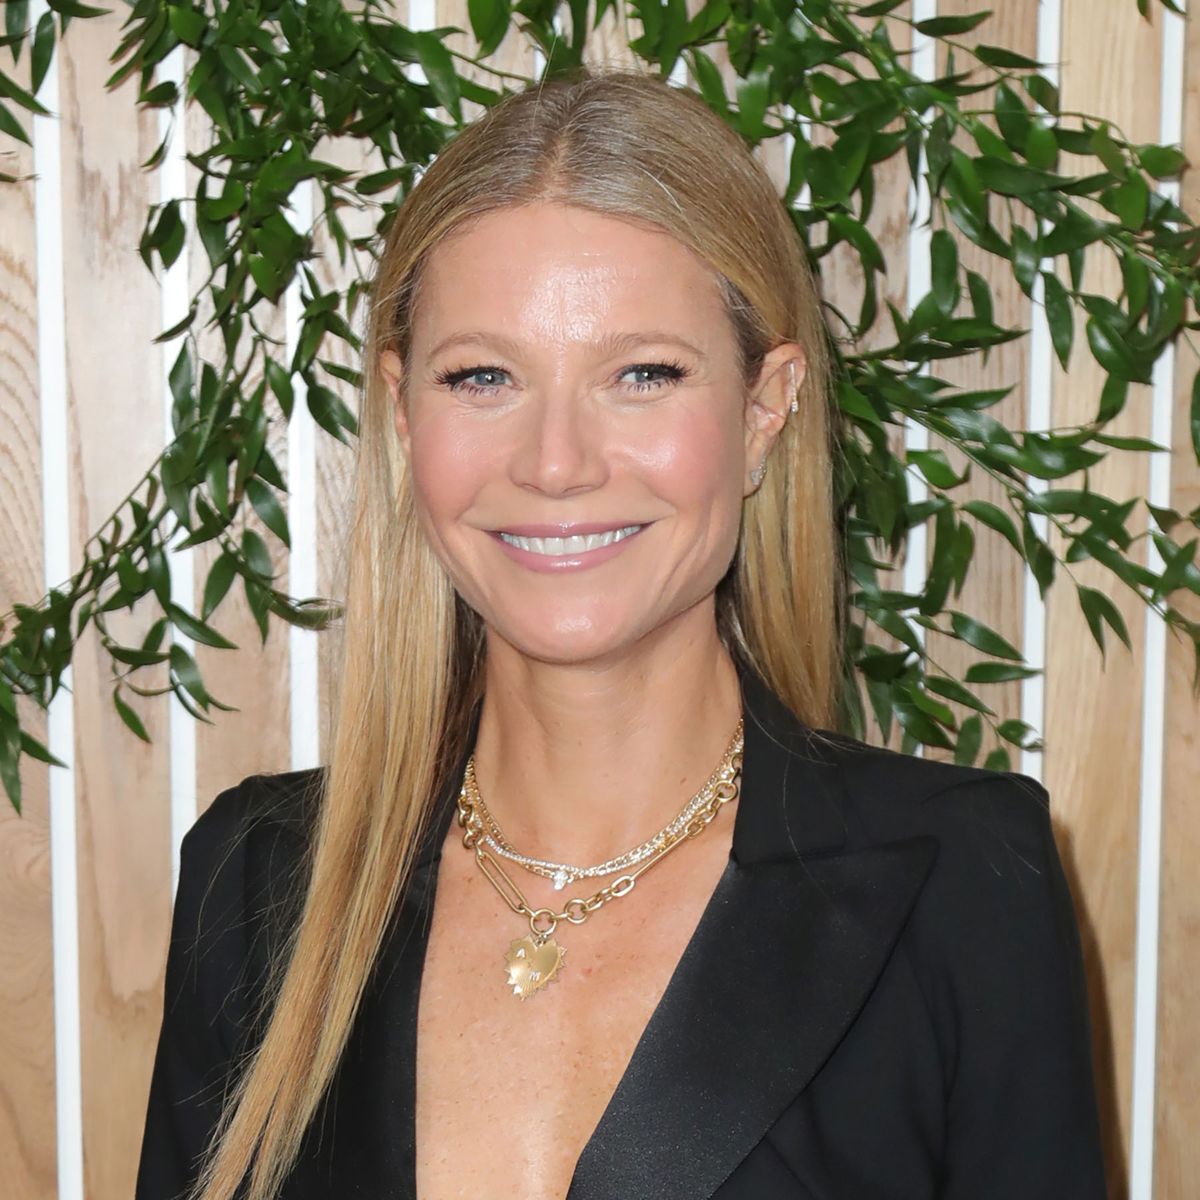 1 Hotel West Hollywood Grand Opening Event - Arrivals WEST HOLLYWOOD, CALIFORNIA - NOVEMBER 05: Gwyneth Paltrow attends 1 Hotel West Hollywood Grand Opening Event at 1 Hotel West Hollywood on November 05, 2019 in West Hollywood, California. (Photo by Leon Bennett/Getty Images)